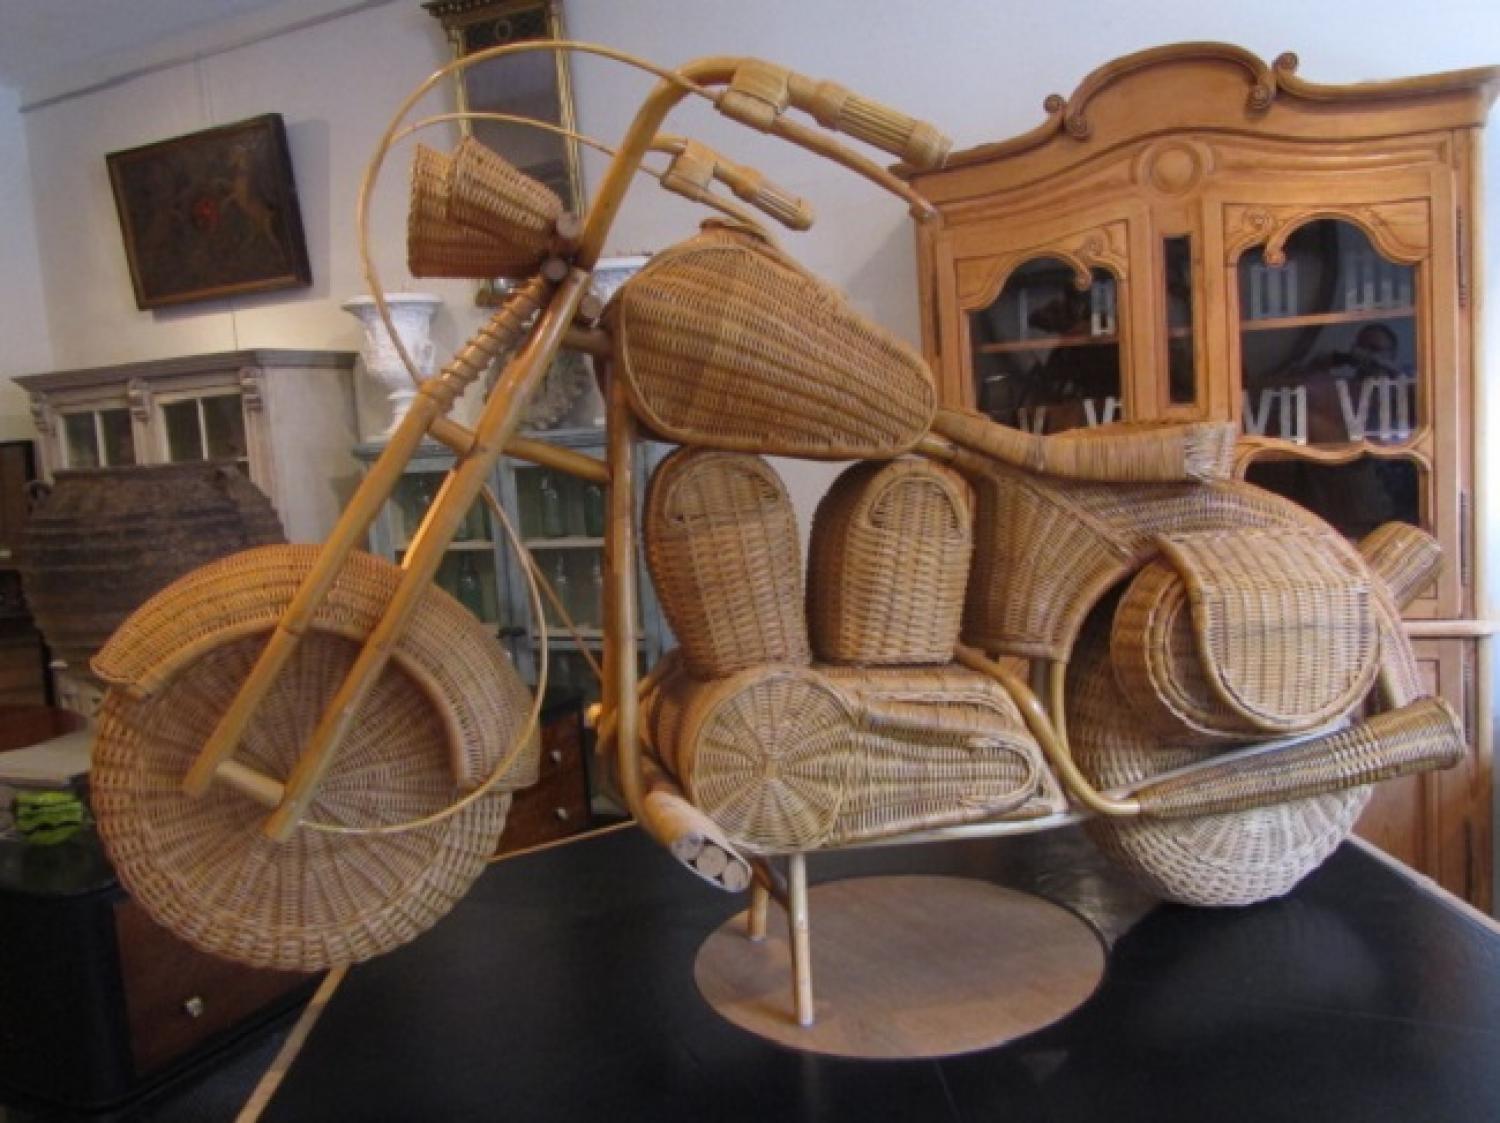 A wicker work sculpture of a vintage Harley D